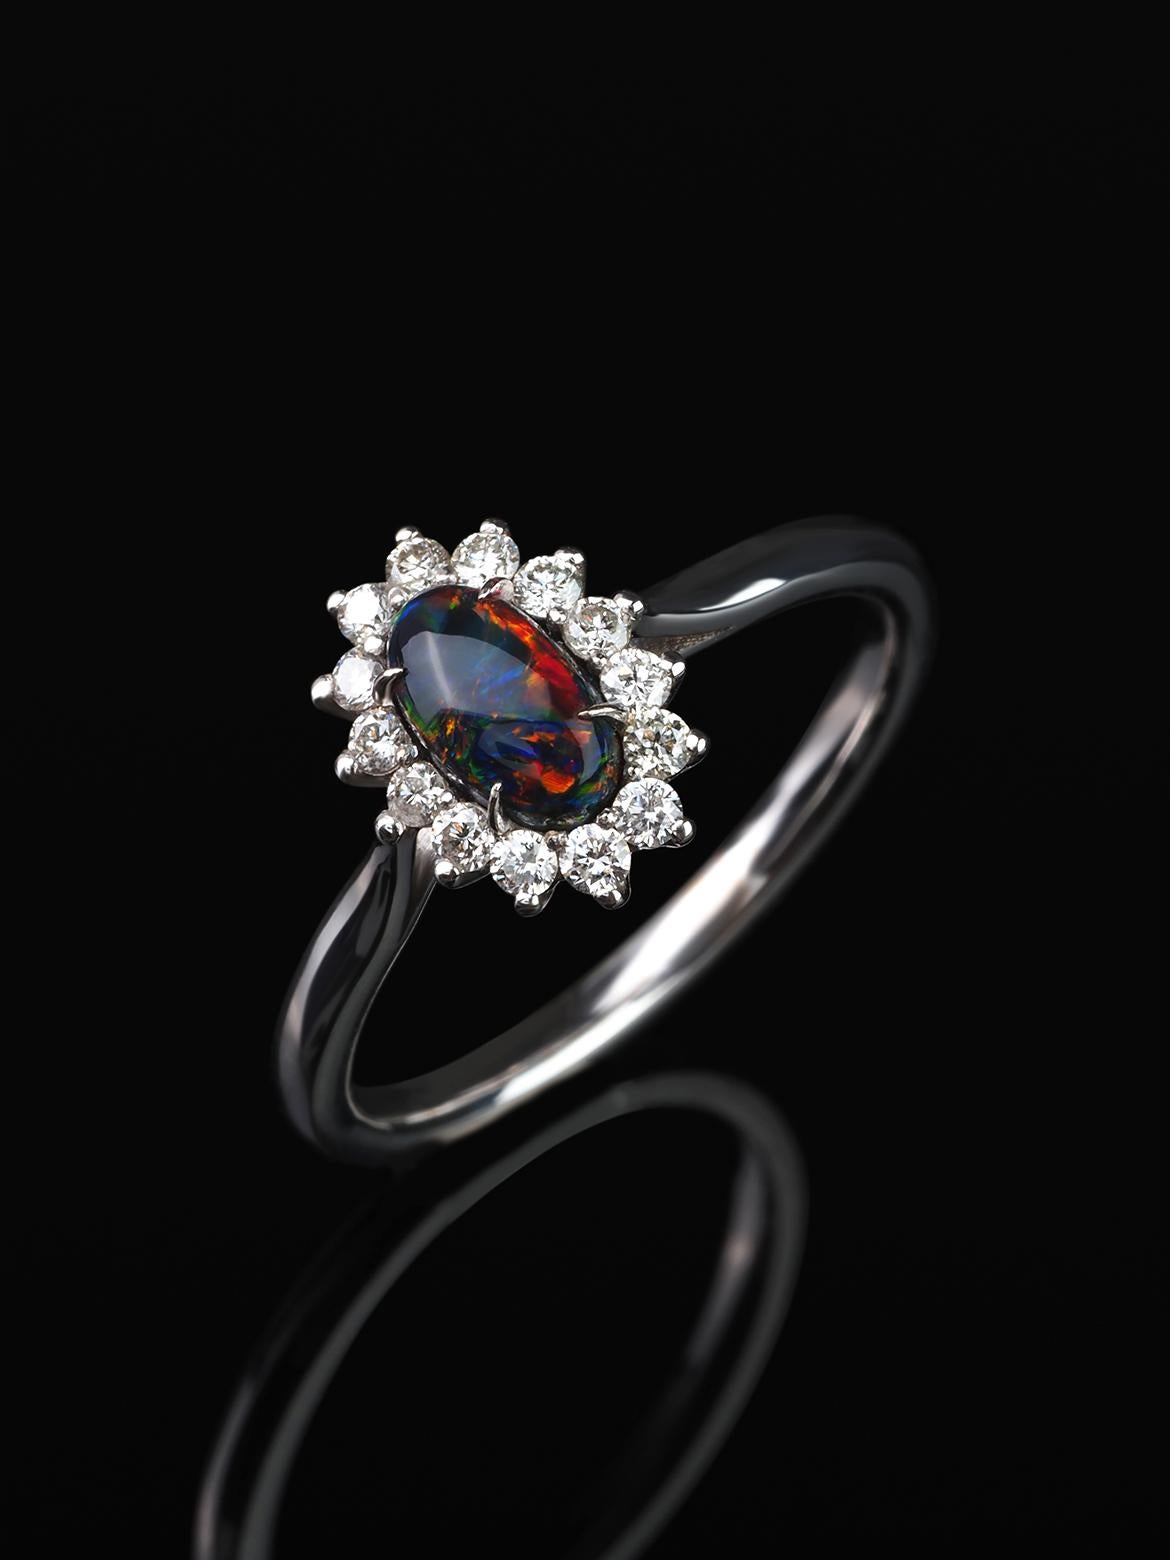 14K gold ring with Black opal and diamonds 
opal origin - Australia 
opal measurements - 0.079 х 0.16 х 0.28 in / 2 х 4 х 7 mm
opal weight - 0.71 carats
ring size - 7 US
ring weight - 2.94 grams

Cupid collection


We ship our jewelry worldwide –